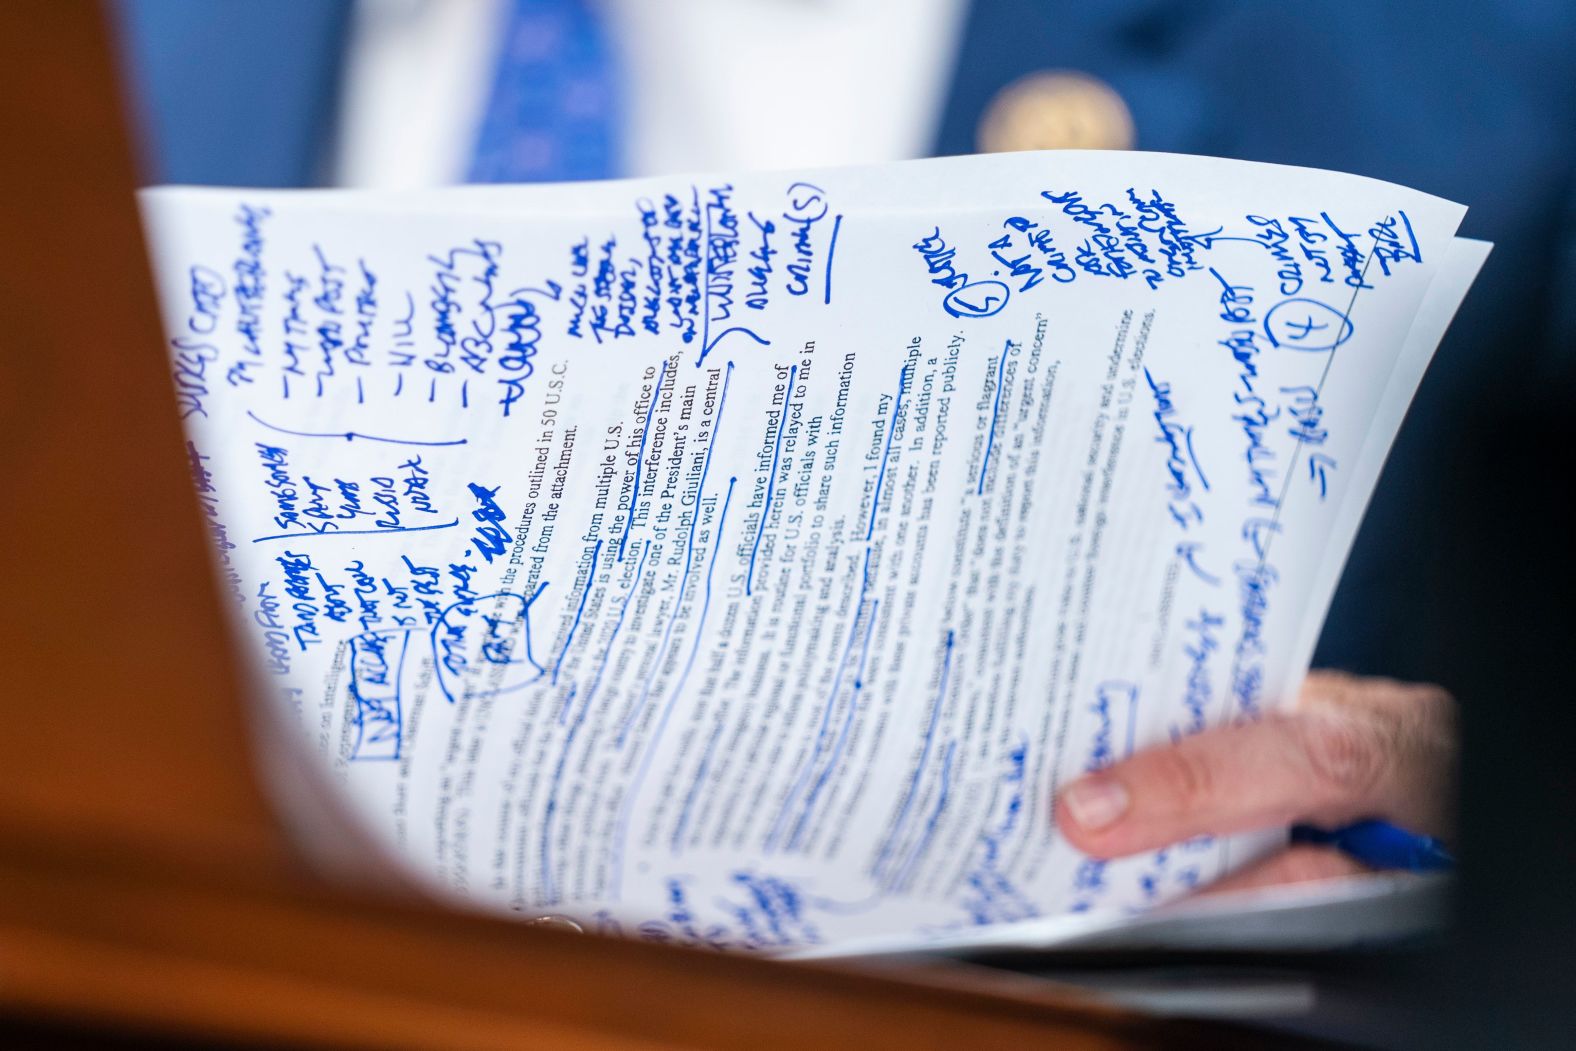 US Rep. John Ratcliffe, a Republican, holds his notes on <a href="https://www.cnn.com/interactive/2019/09/politics/whistleblower-complaint-annotated/" target="_blank">the whistleblower's complaint</a> as he questions Maguire on September 26.